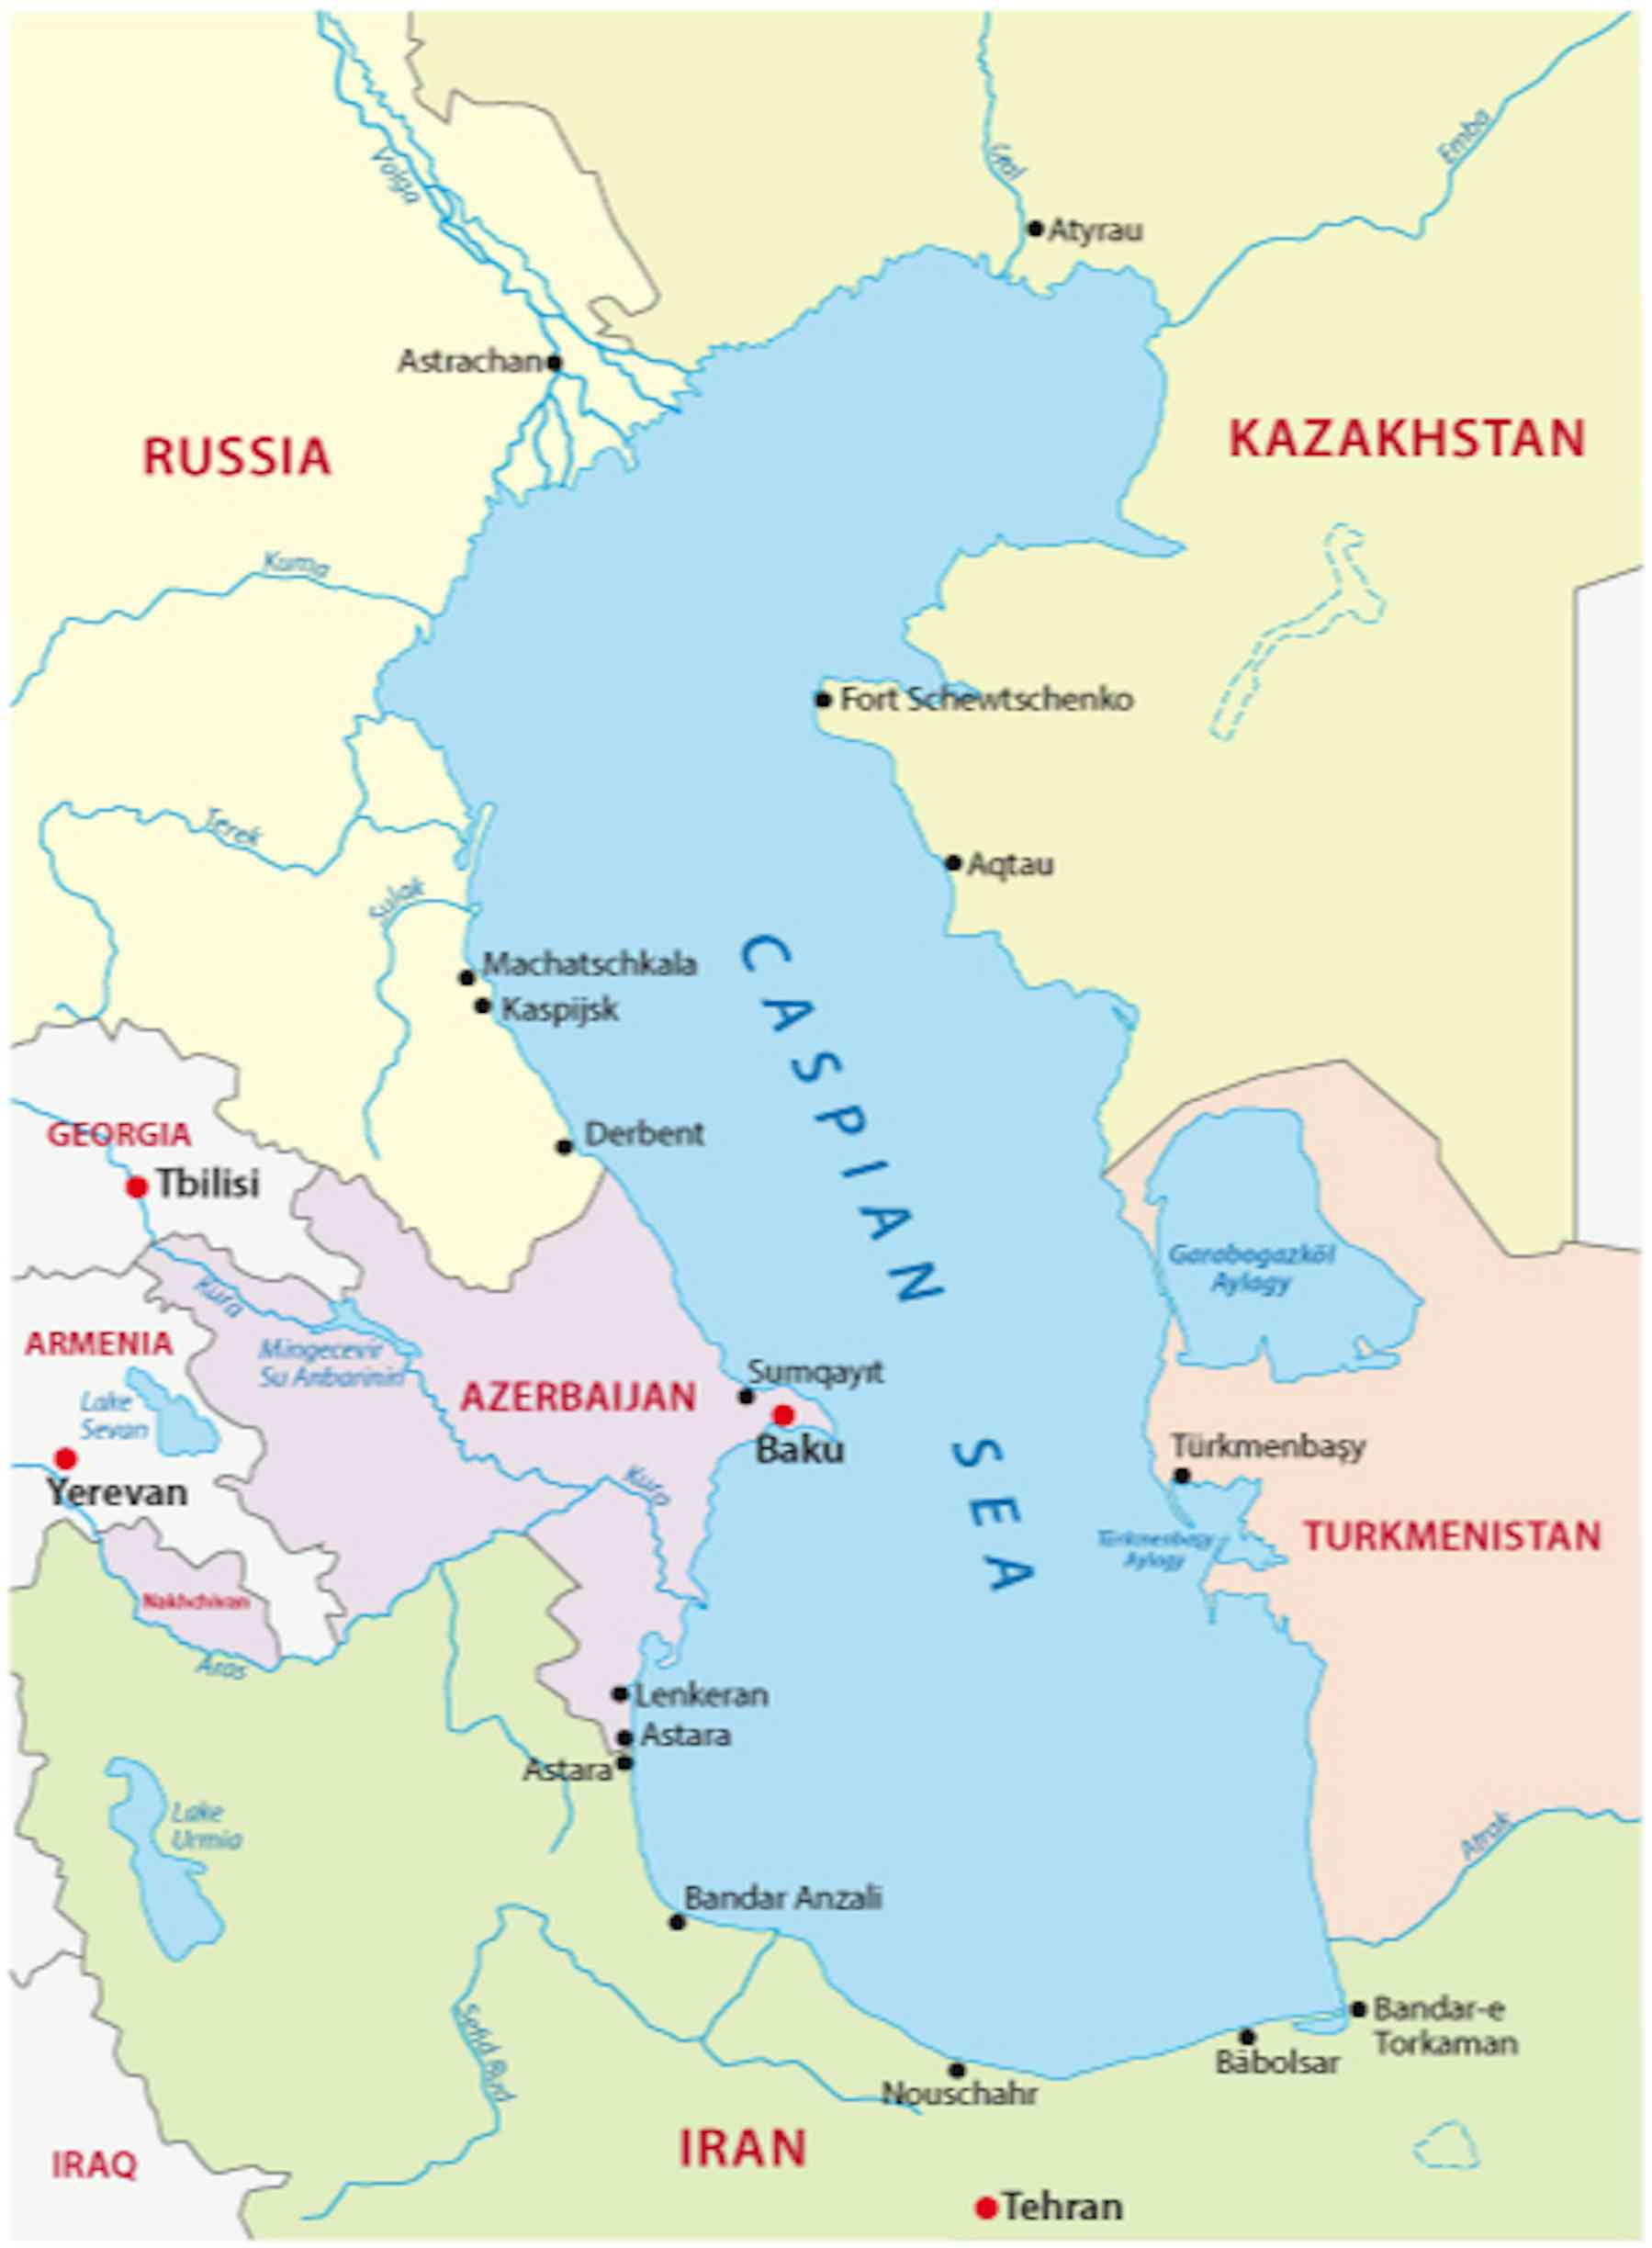 The Caspian Sea is set to fall by 9 metres or more this century an